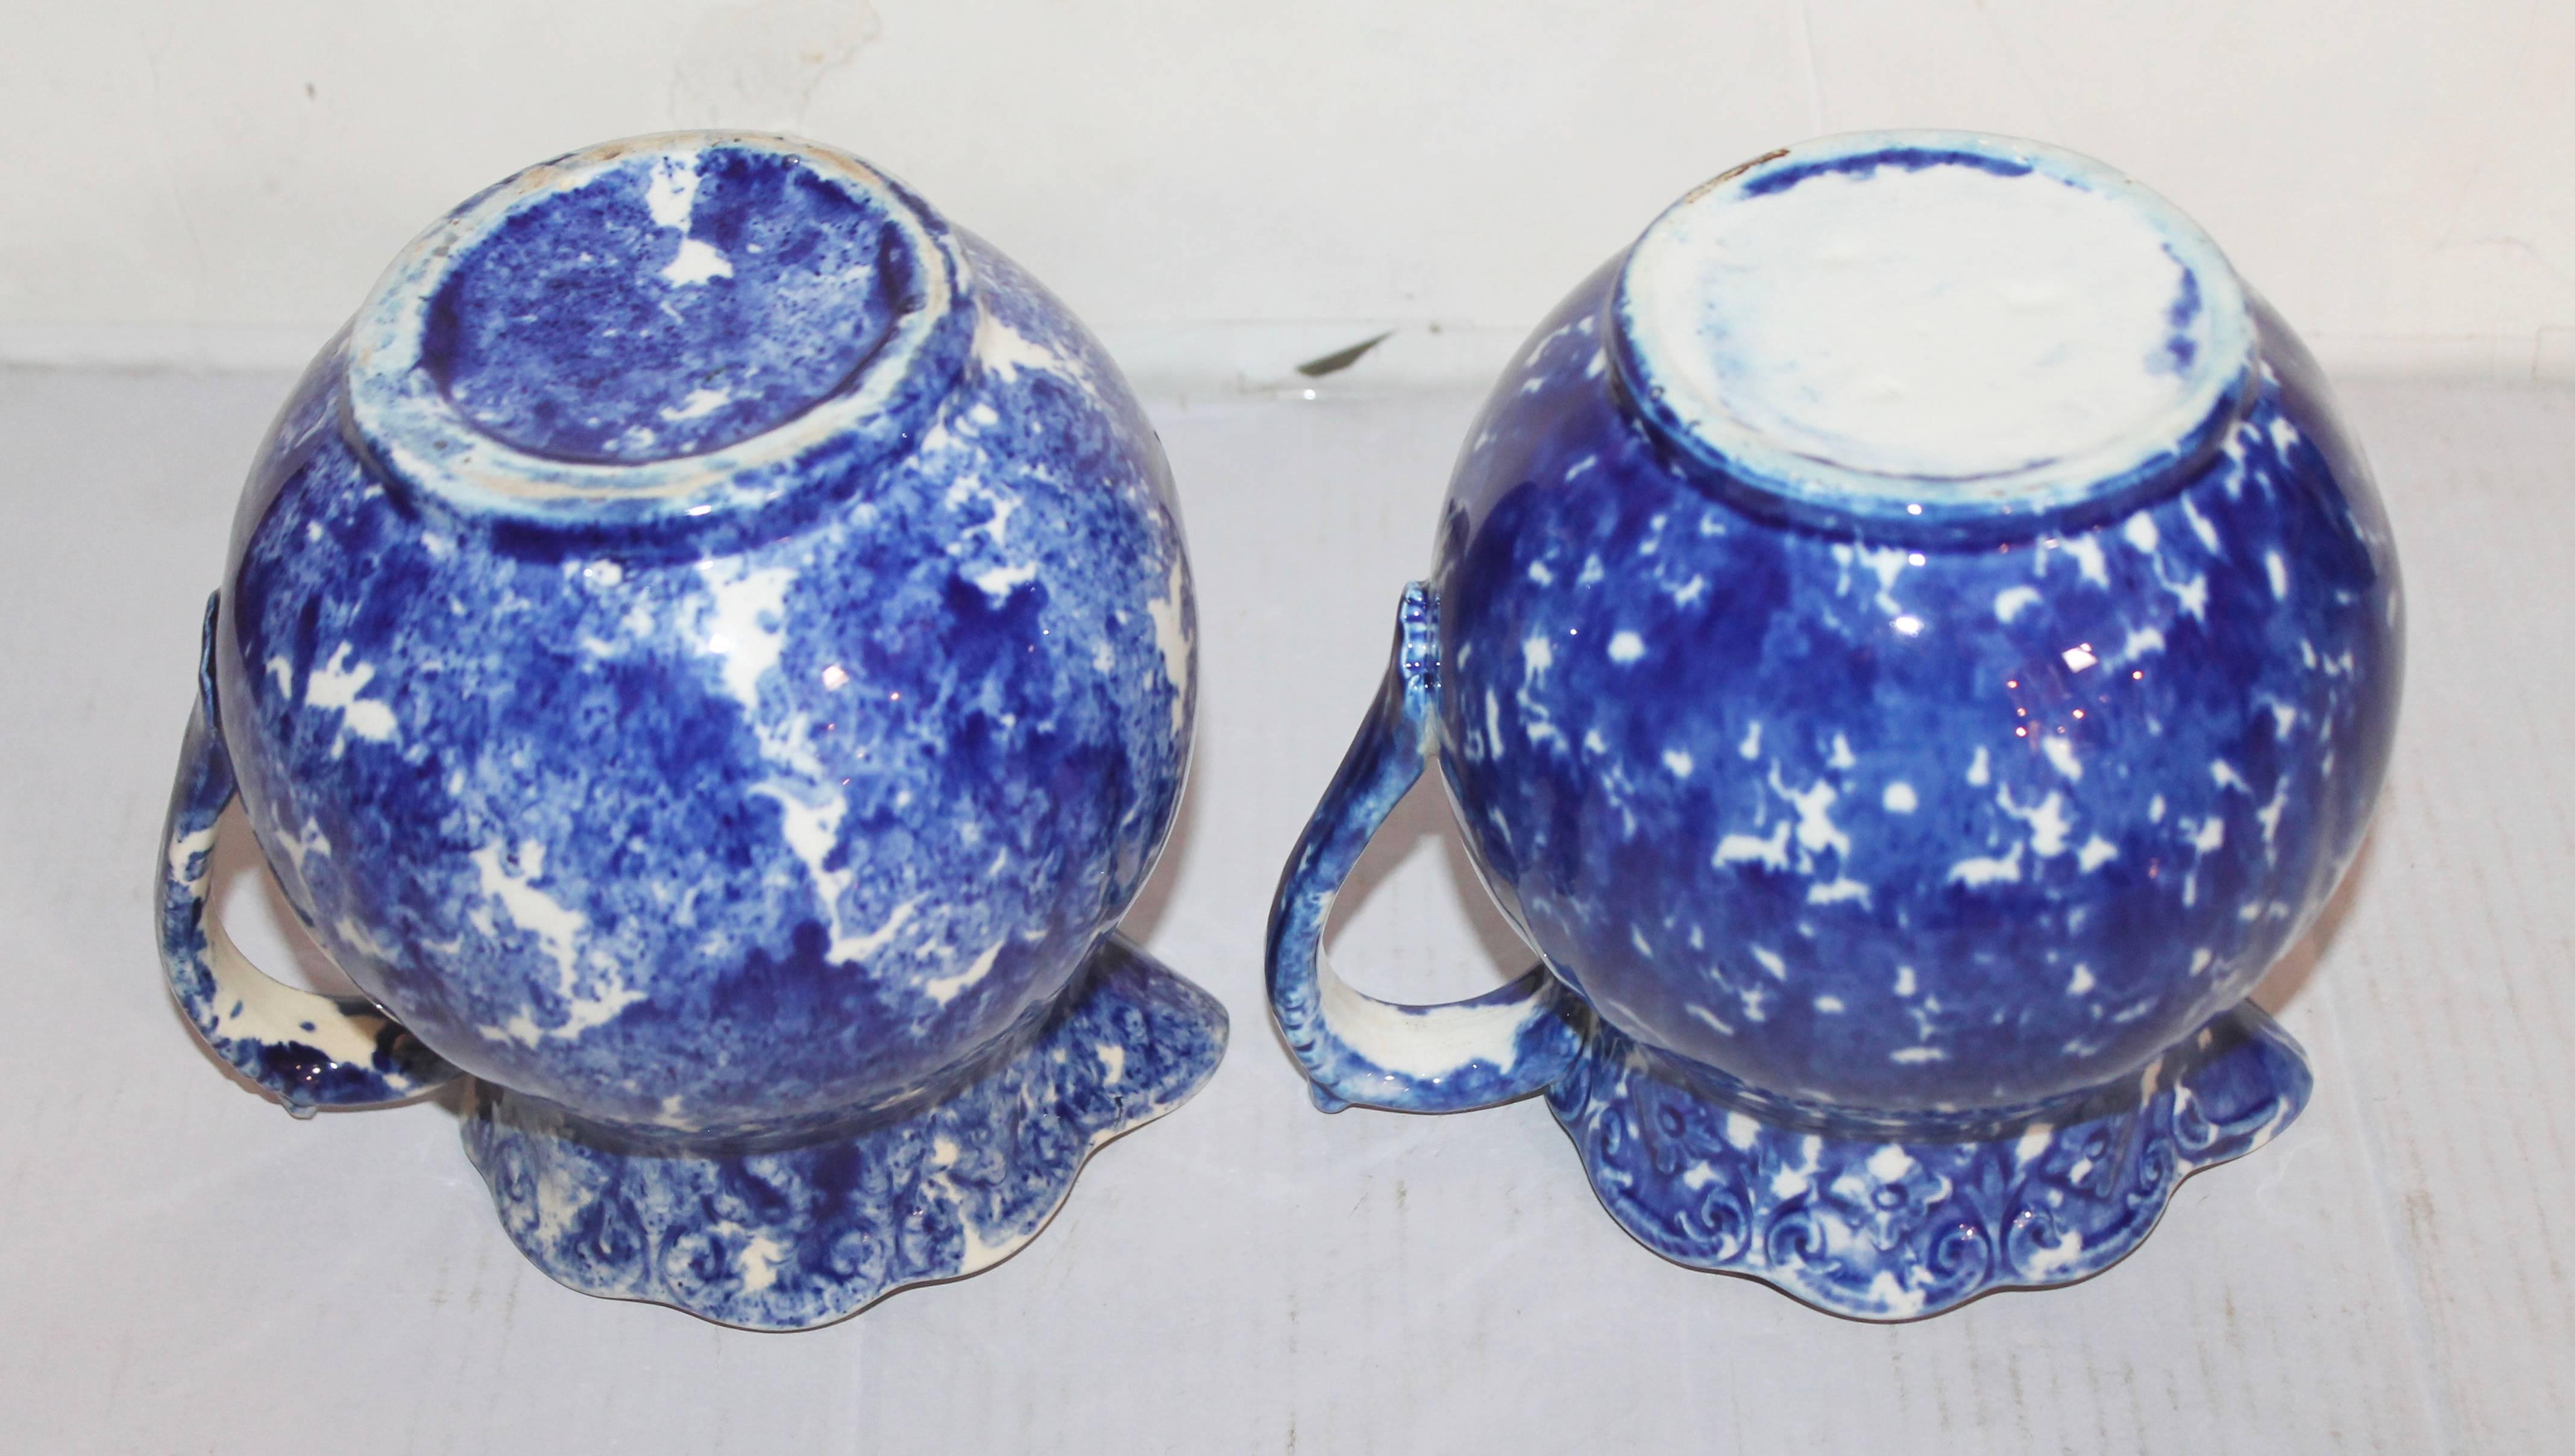 Glazed Pair of 19th Century American Sponge Ware Pitchers For Sale